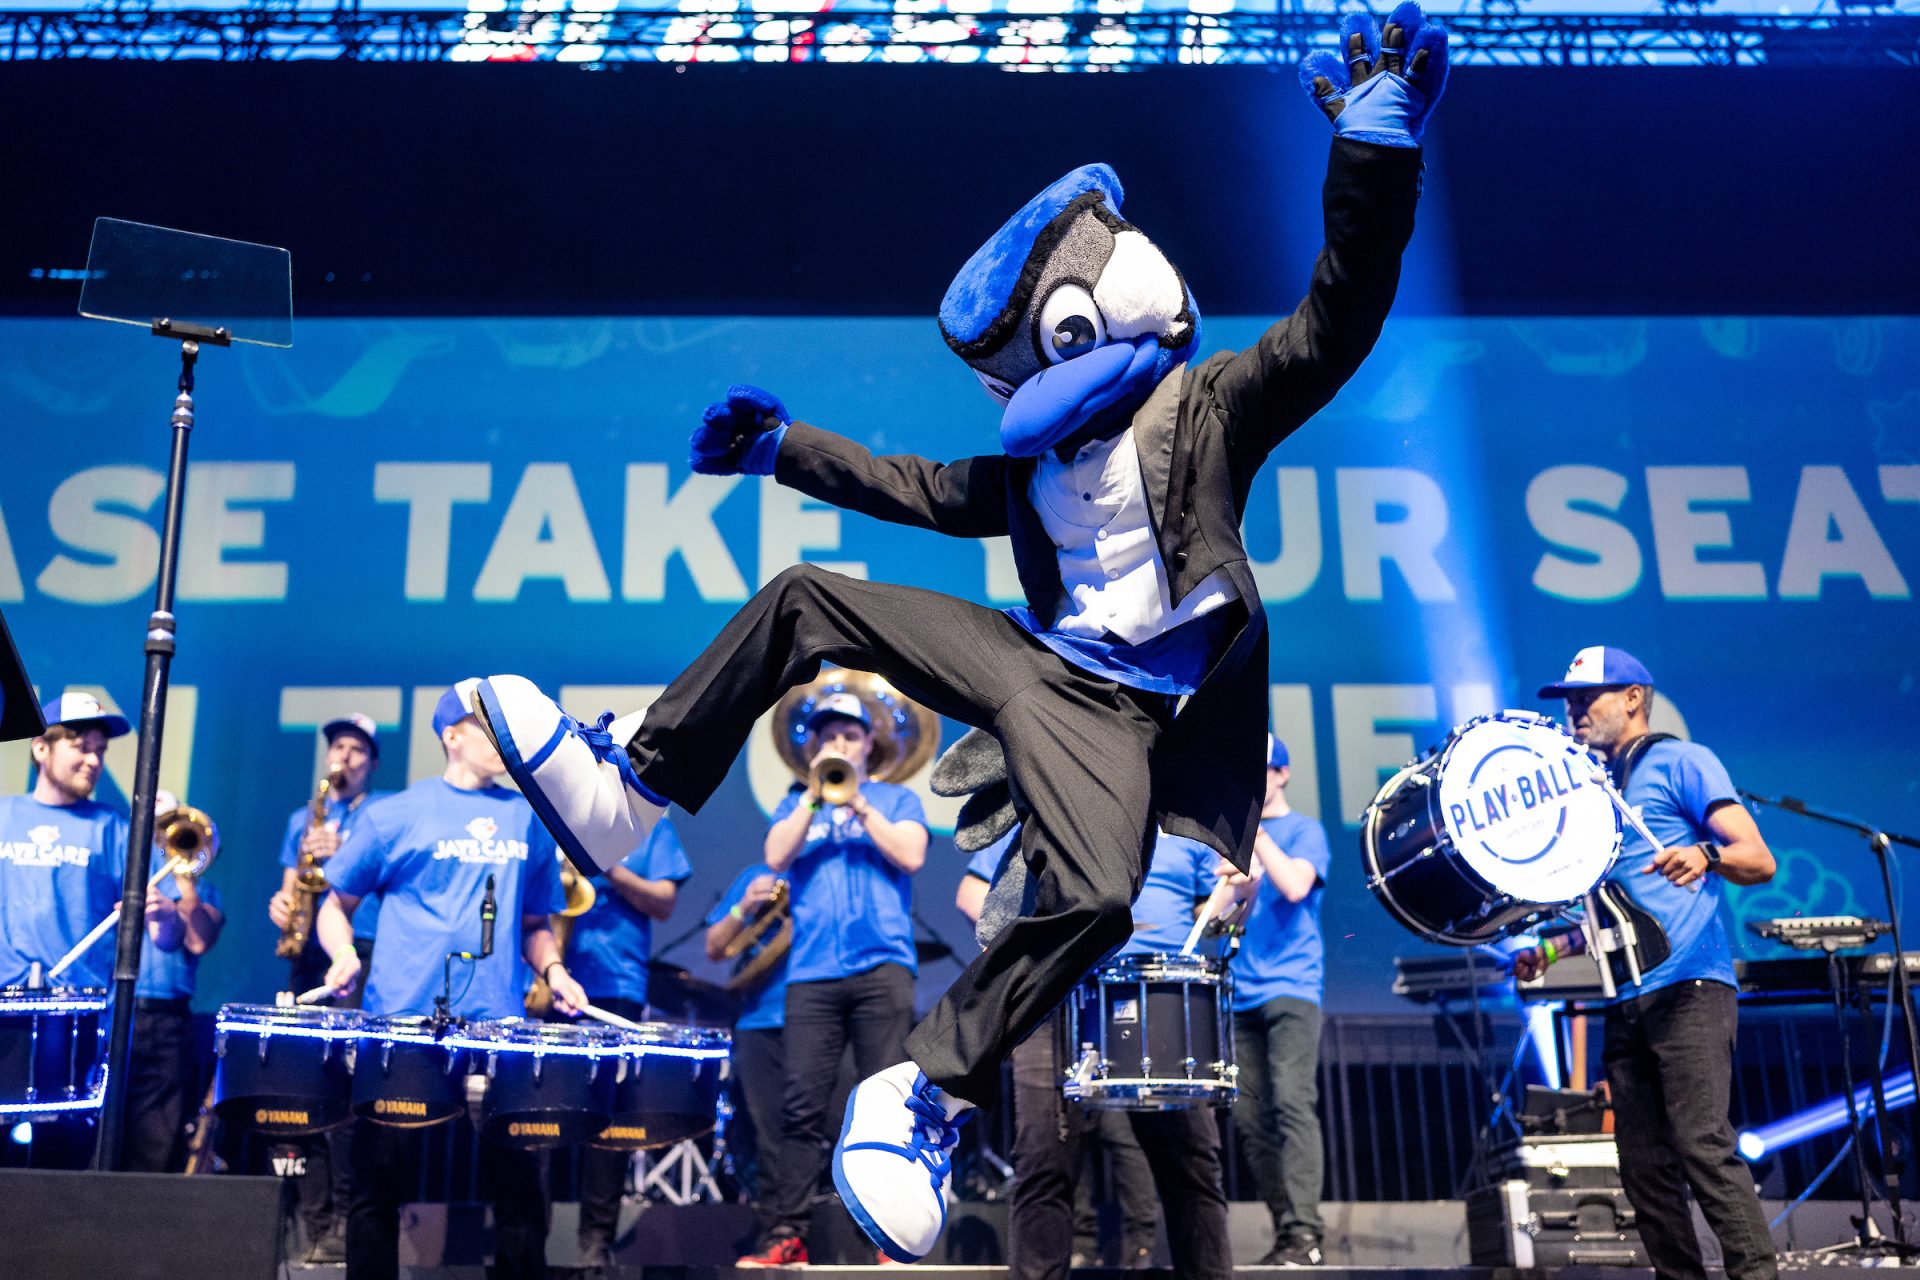 Blue Jays mascot doing a celebratory jump kick at the Play Ball charity event.